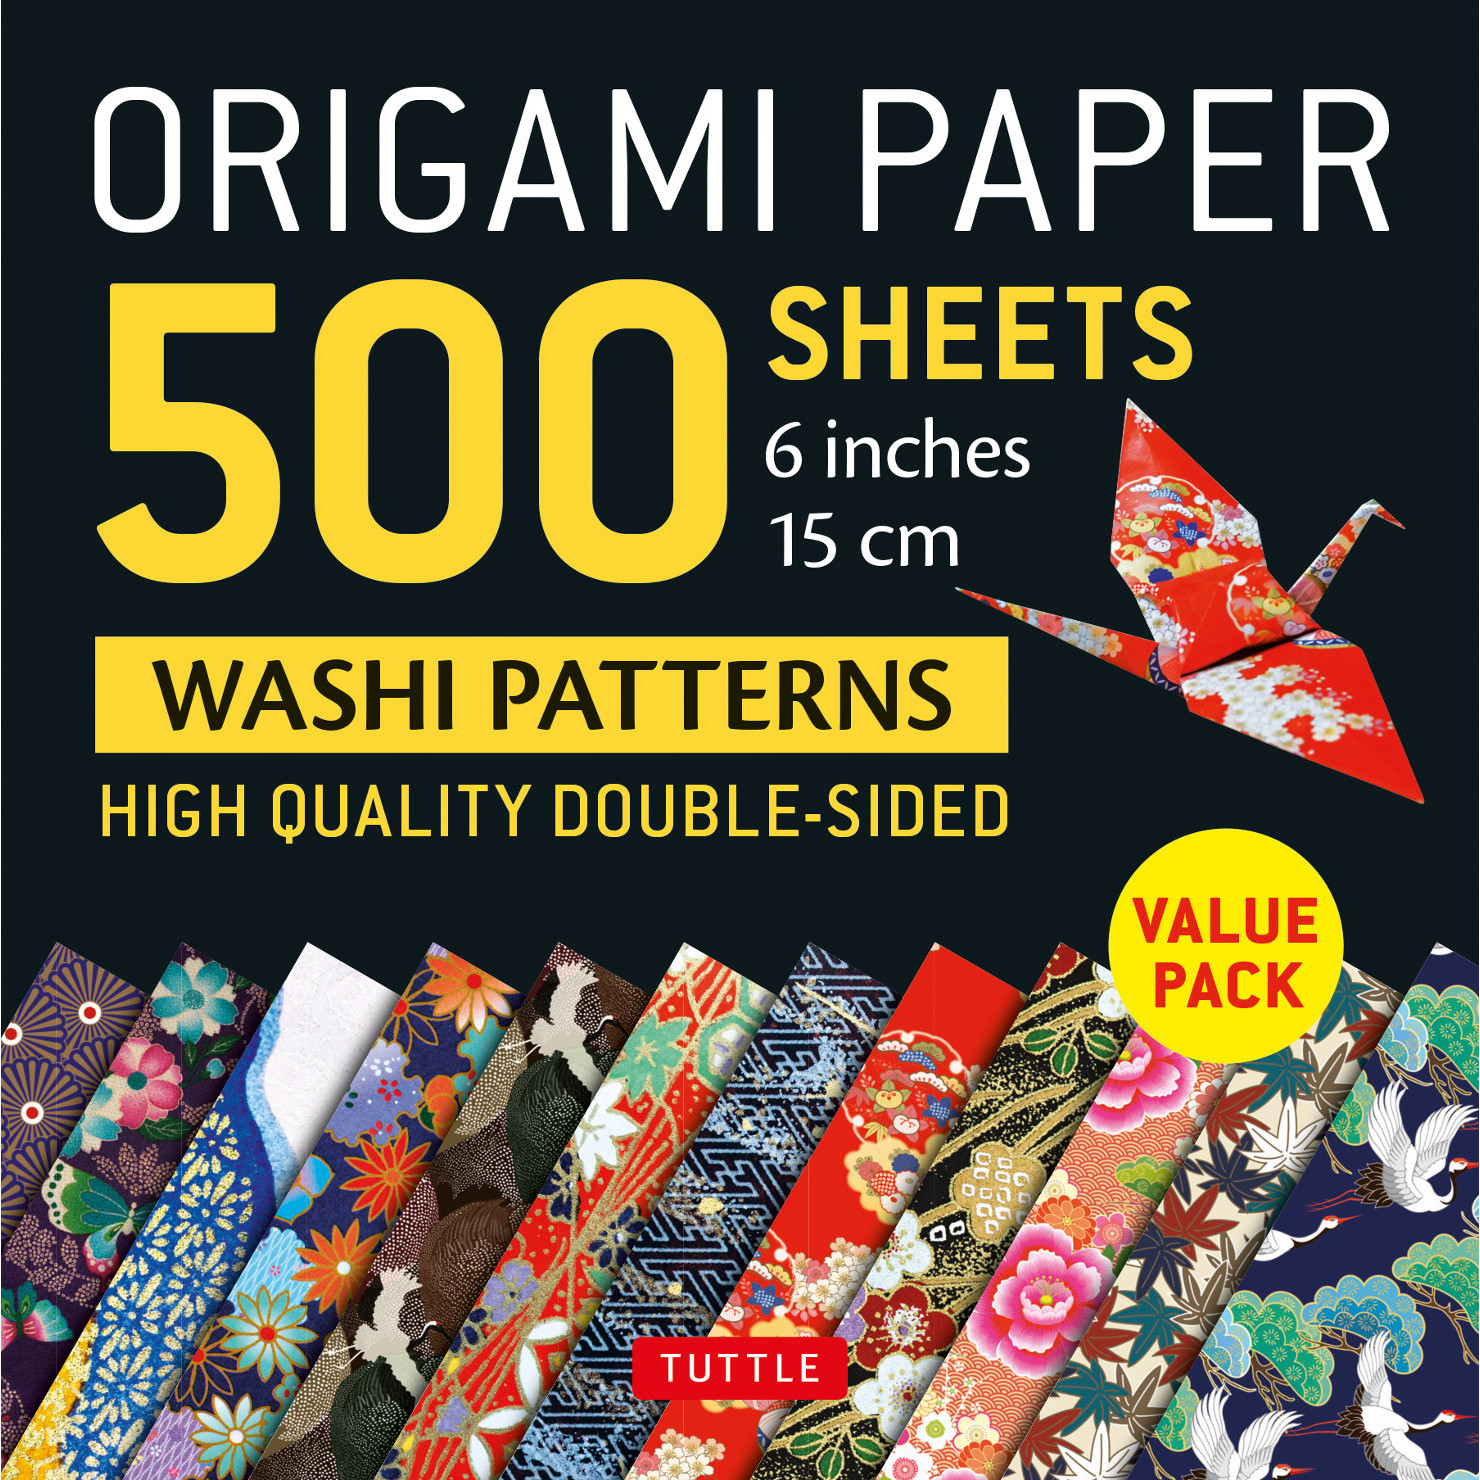 Origami Paper in a Box - Chiyogami Patterns: 200 Sheets of Tuttle Origami  Paper: 6x6 Inch High-Quality Origami Paper Printed with 12 Different Pattern